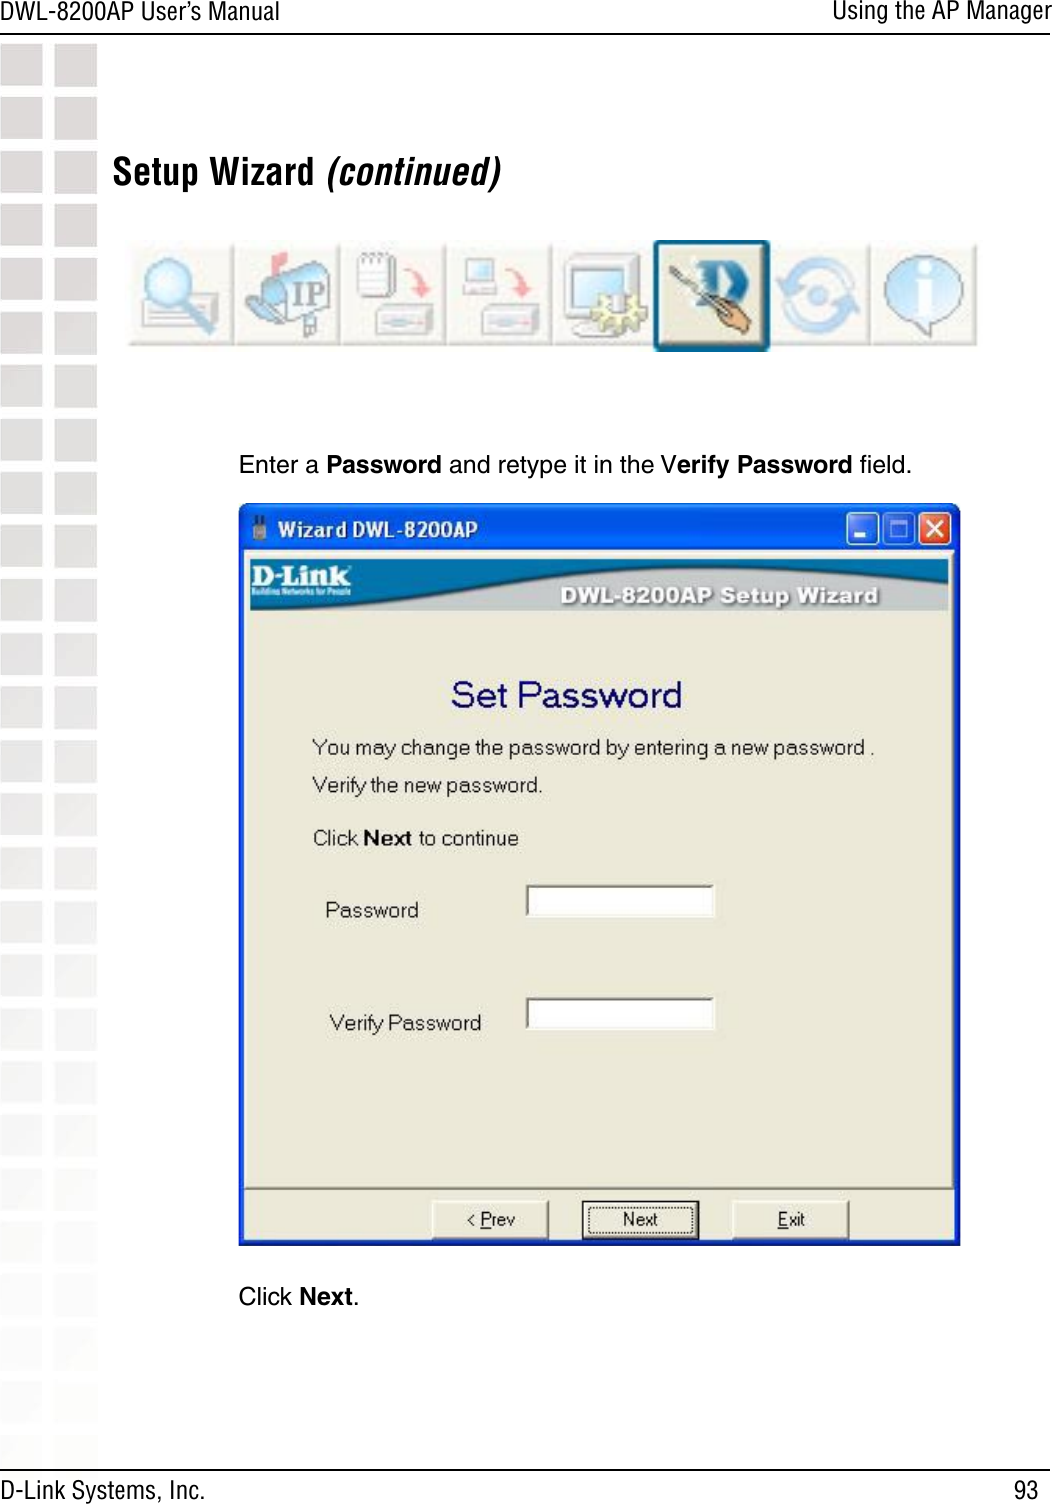 93DWL-8200AP User’s ManualD-Link Systems, Inc.Using the AP ManagerSetup Wizard (continued)Enter a Password and retype it in the Verify Password ﬁeld.Click Next.